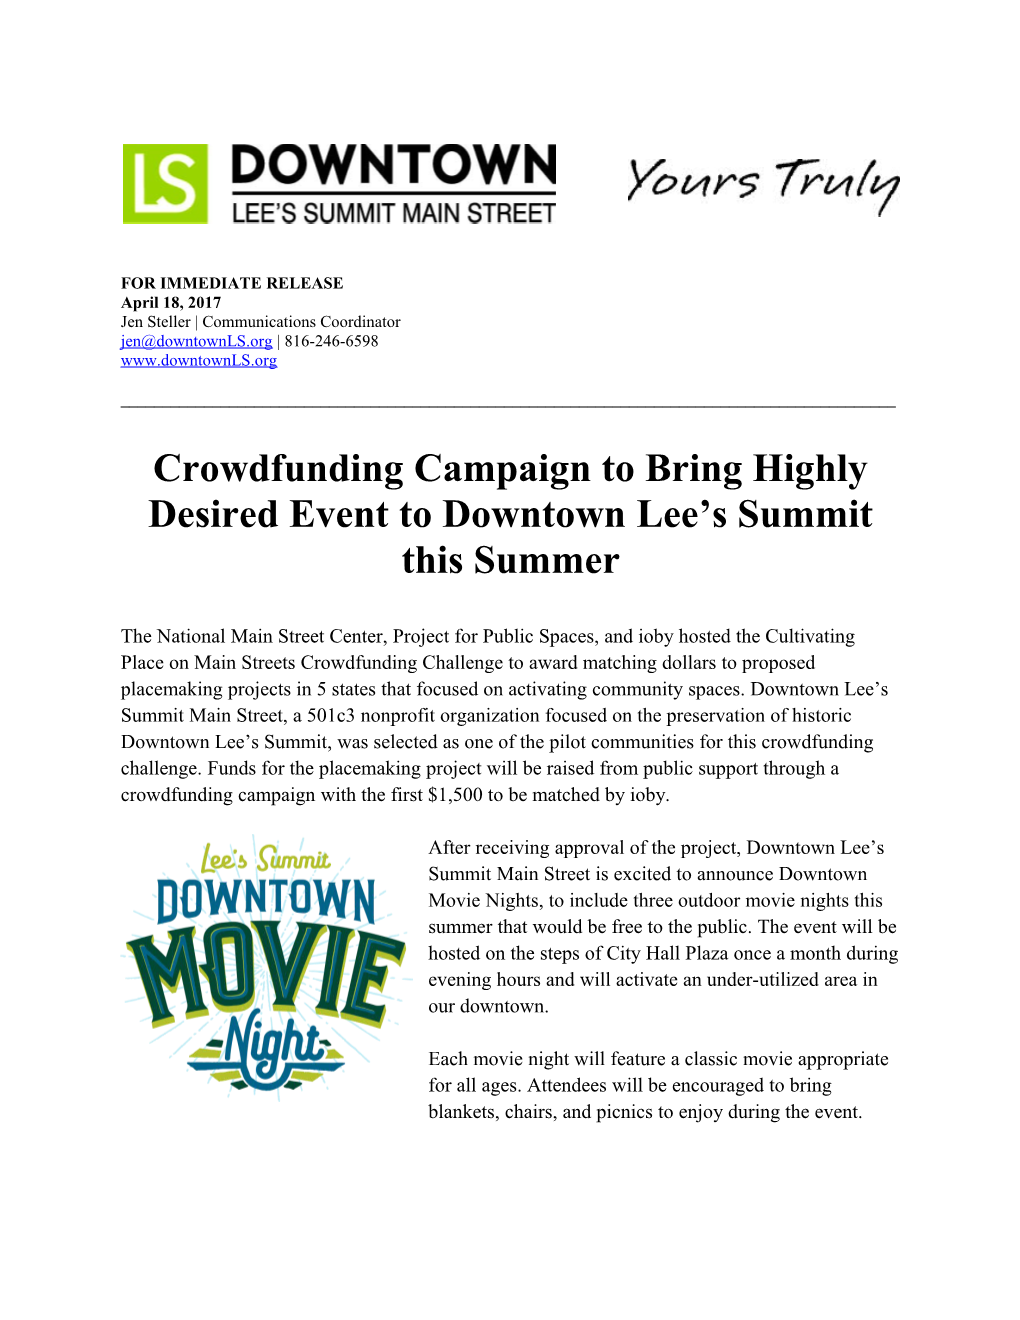 Crowdfunding Campaign to Bring Highly Desired Event to Downtown Lee S Summit This Summer